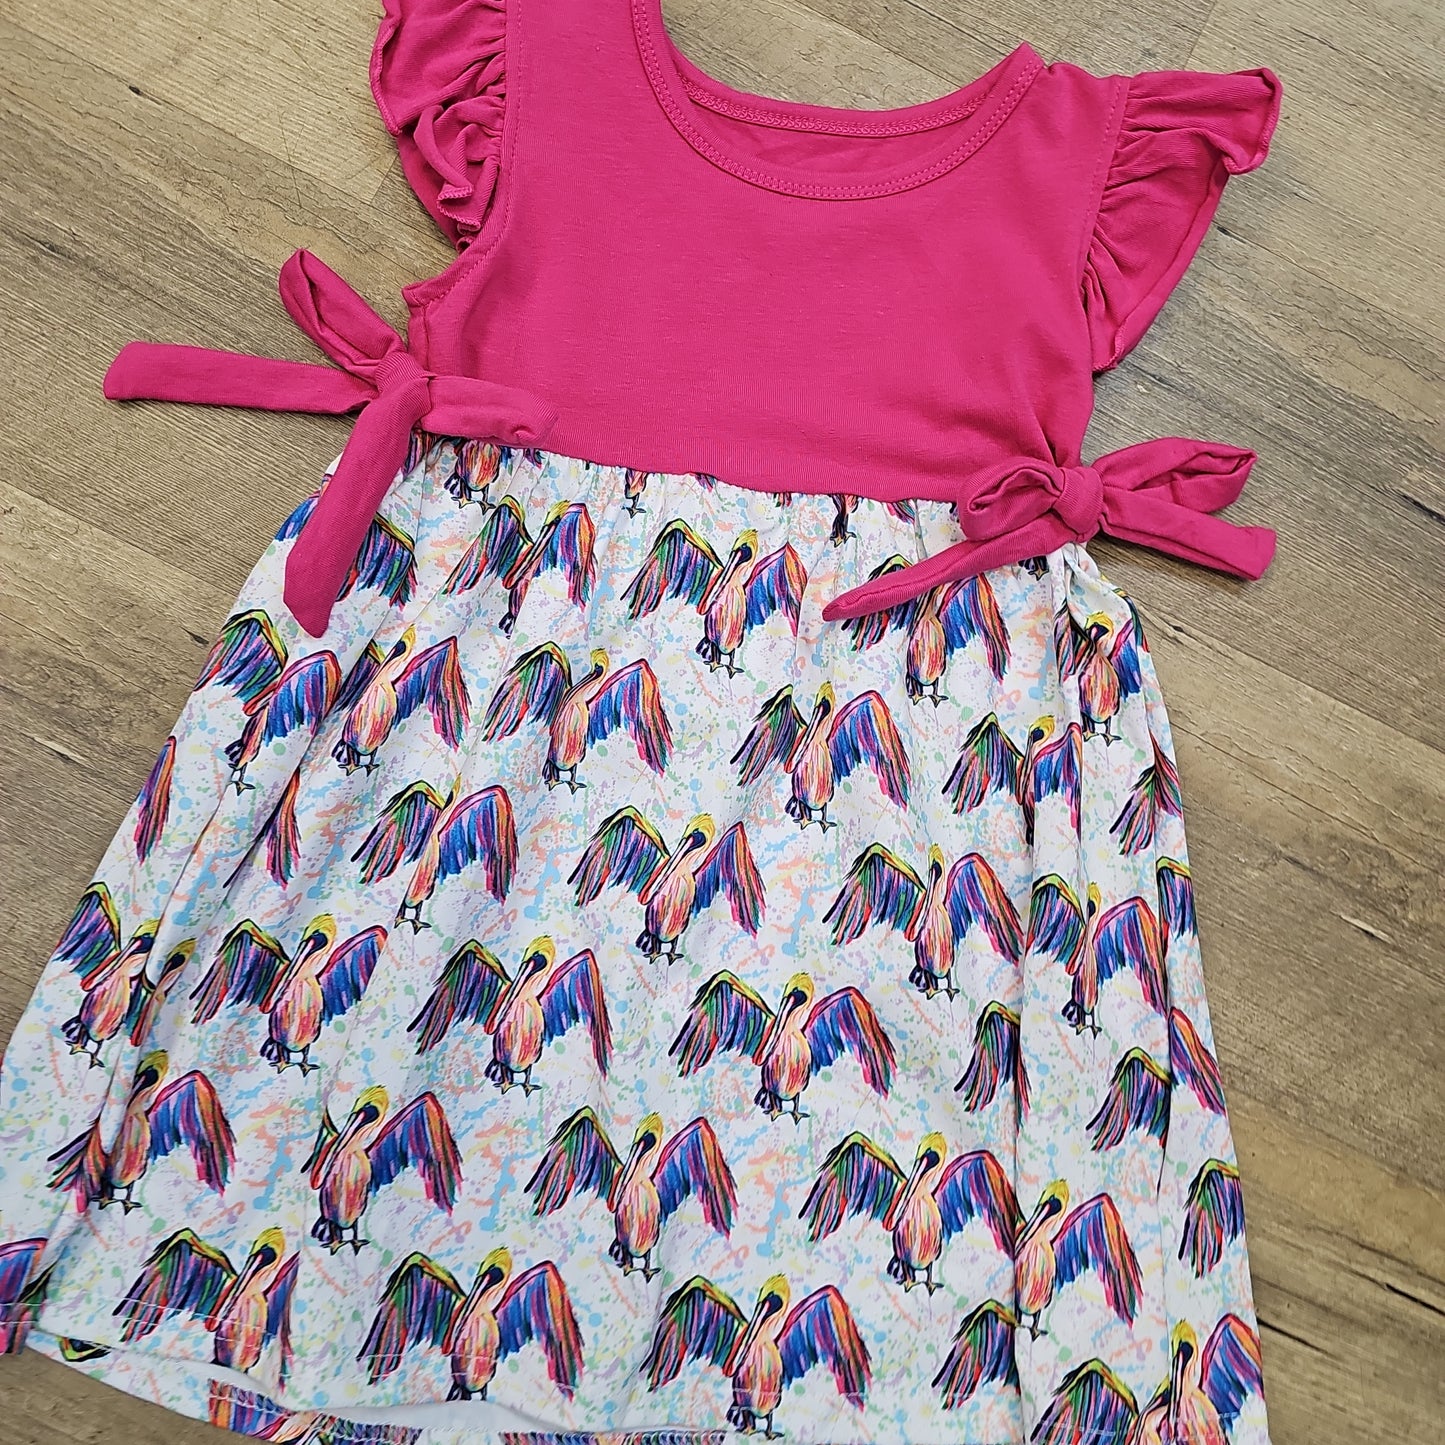 Bright Pelican Dress with Pink Ruffles